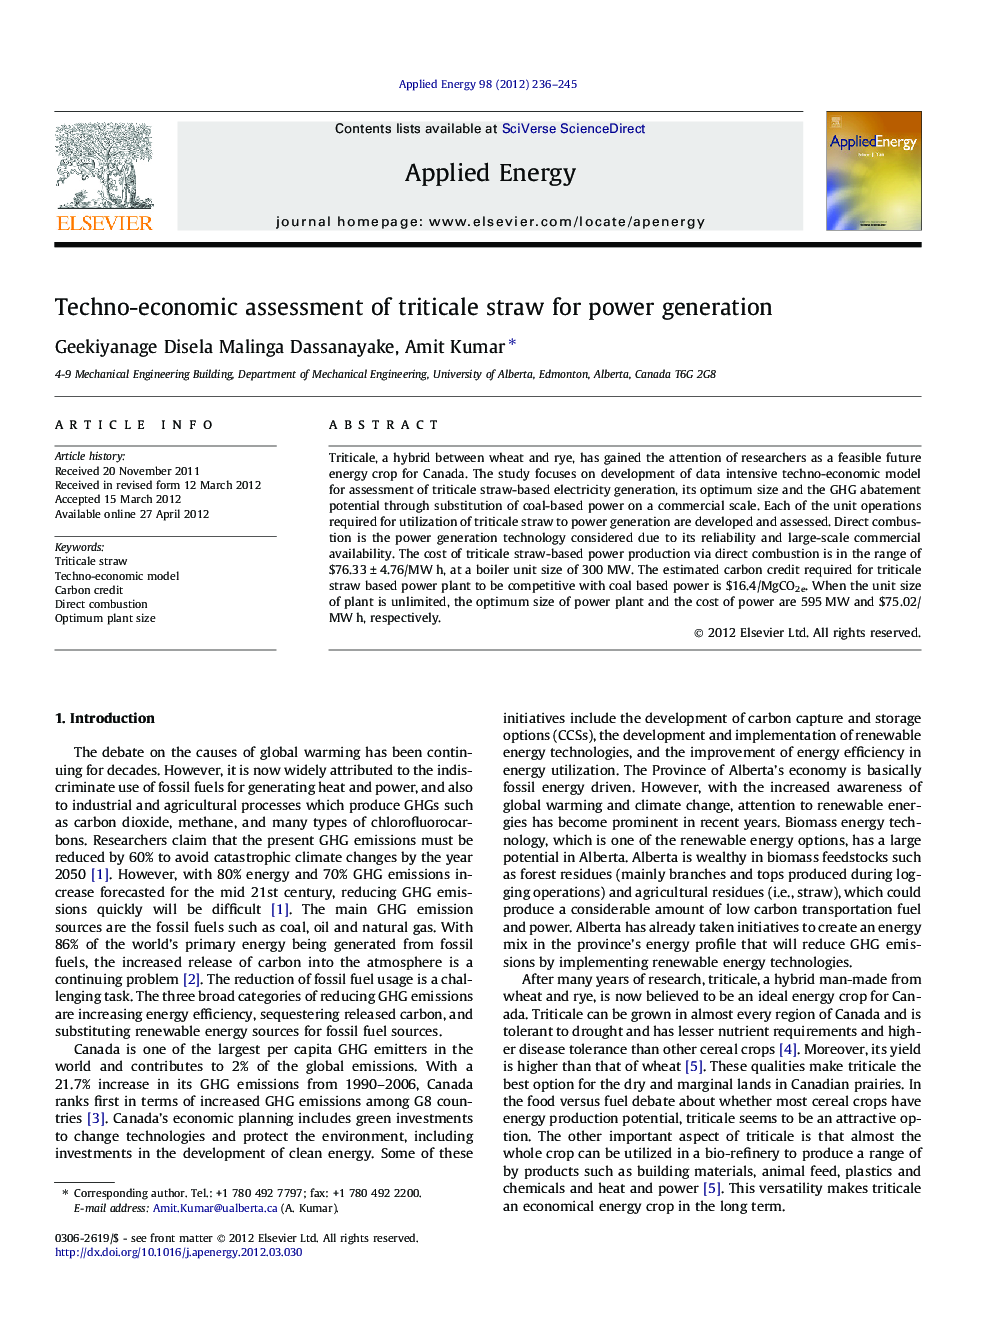 Techno-economic assessment of triticale straw for power generation